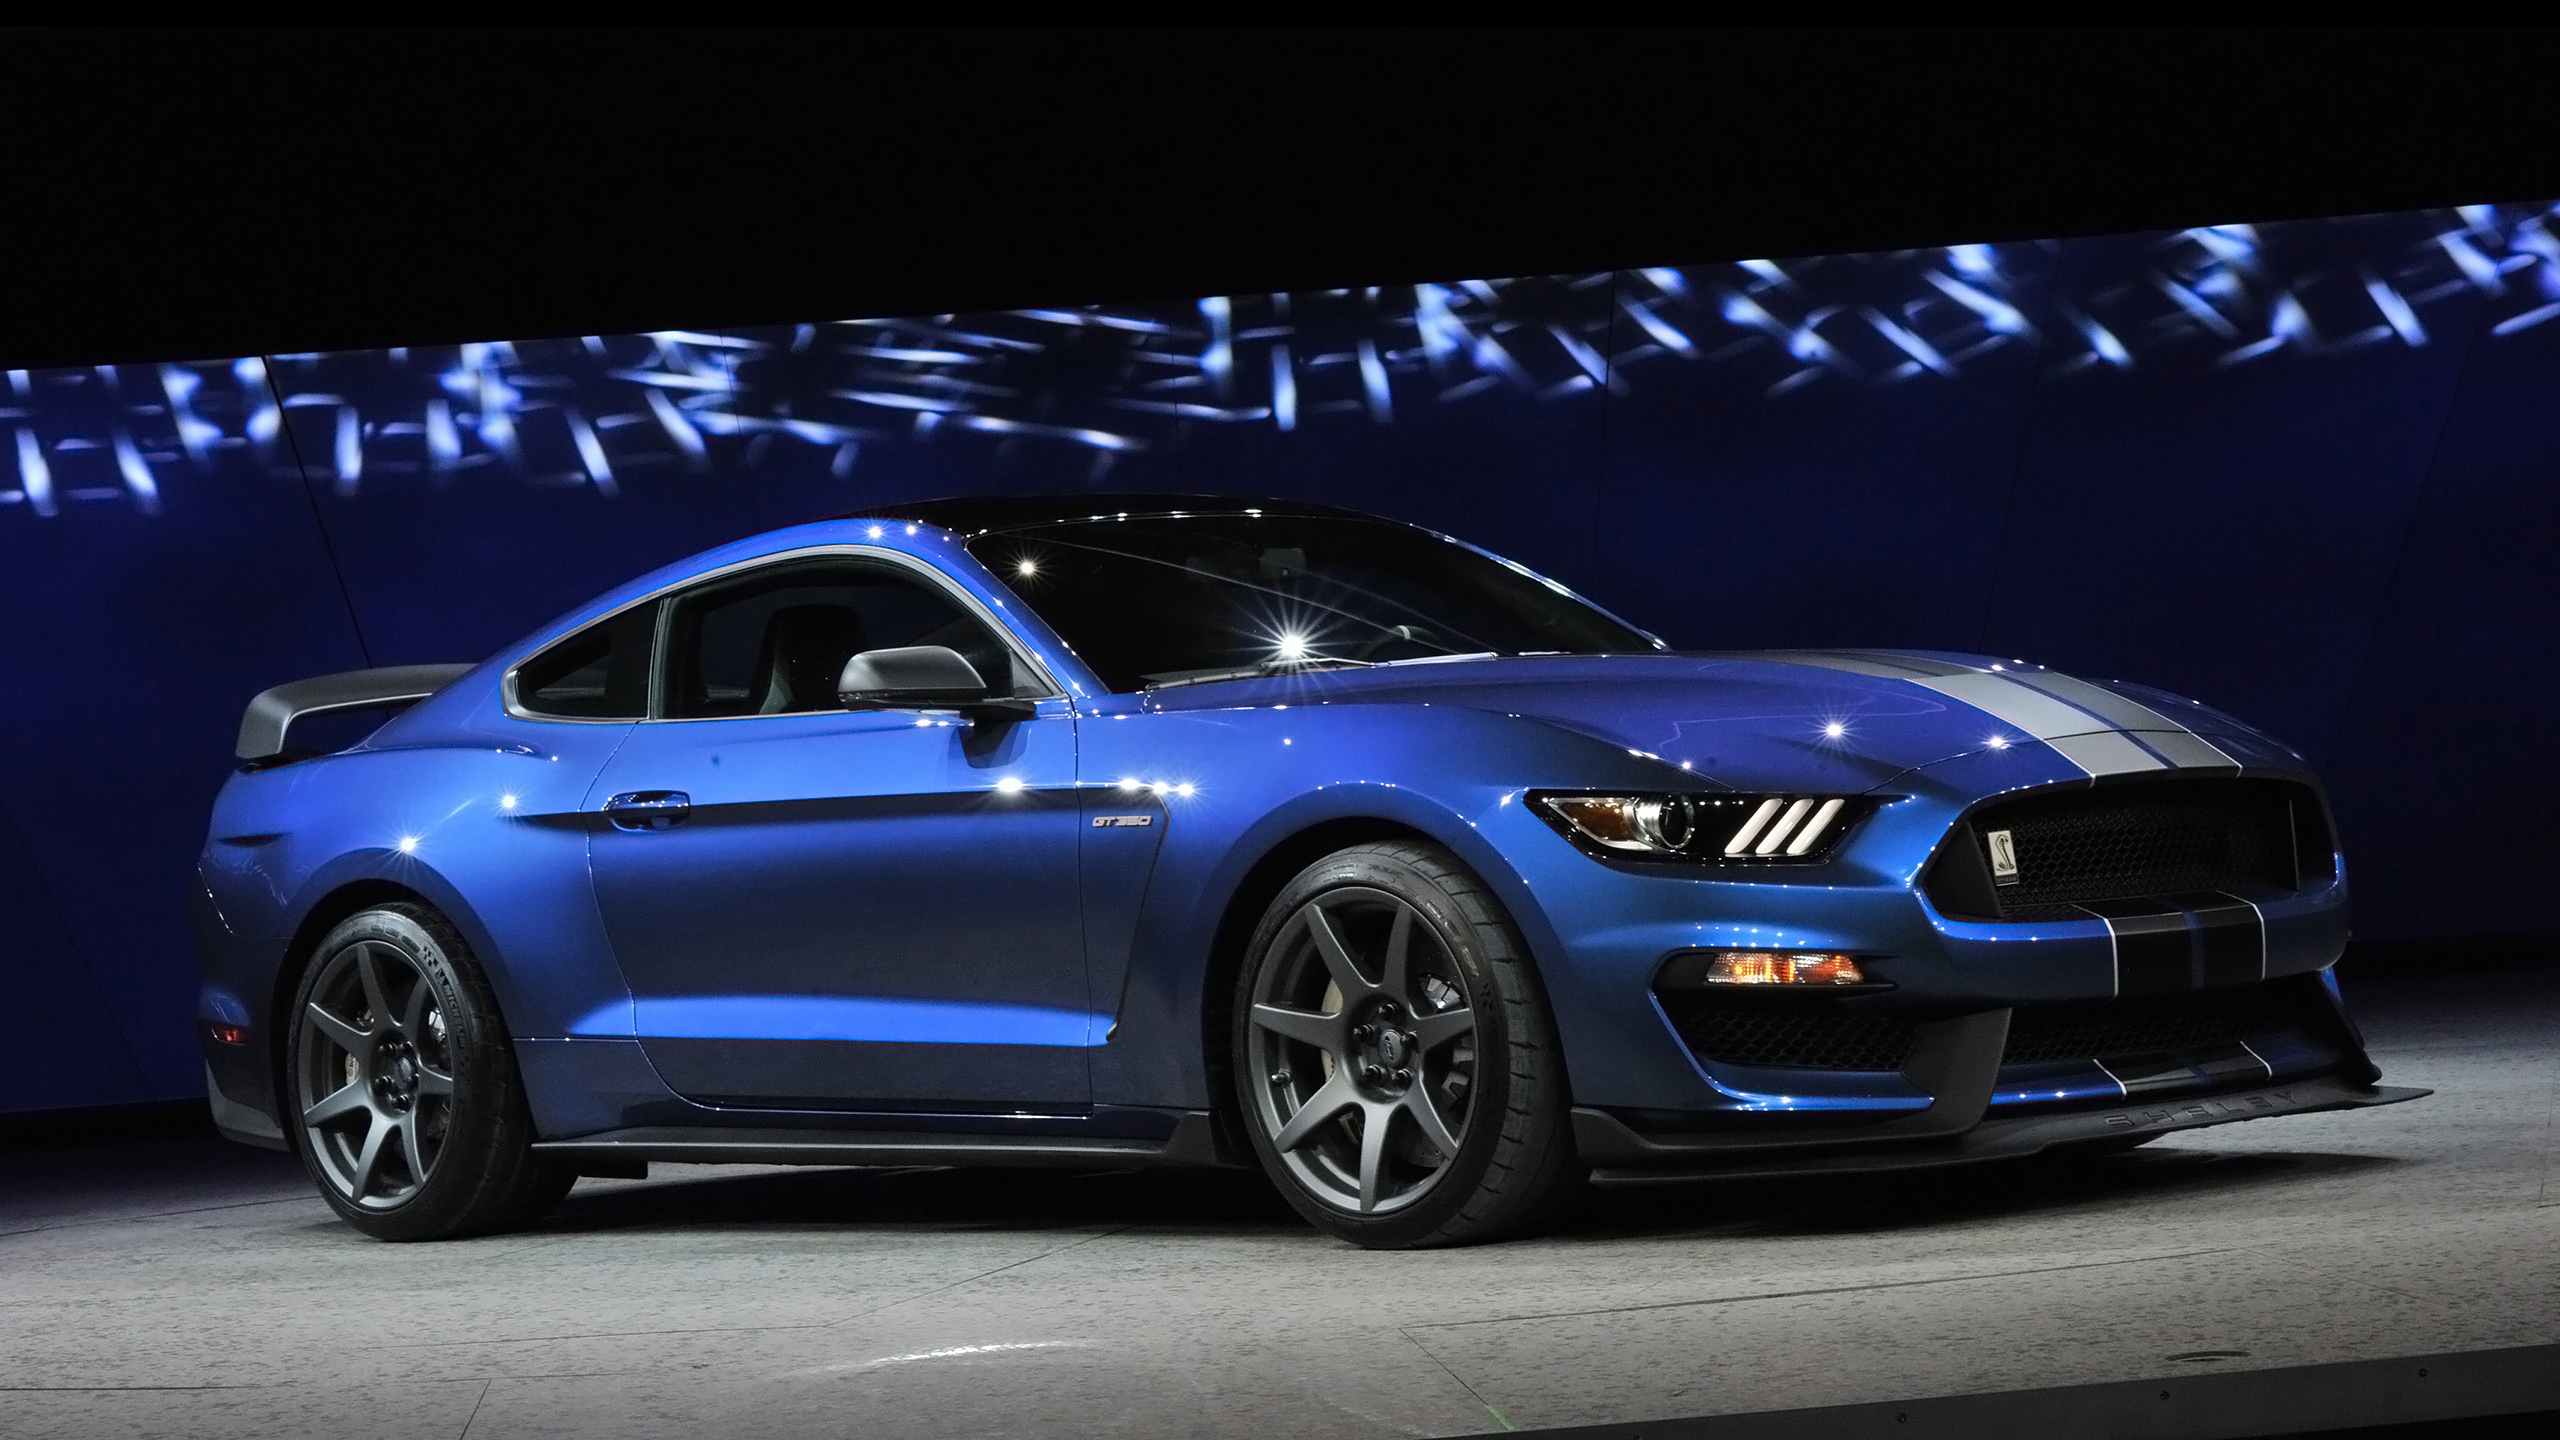 2016 Ford Shelby Gt350r Mustang 2related Car Wallpapers Wallpaper Cars Wallpaper Better